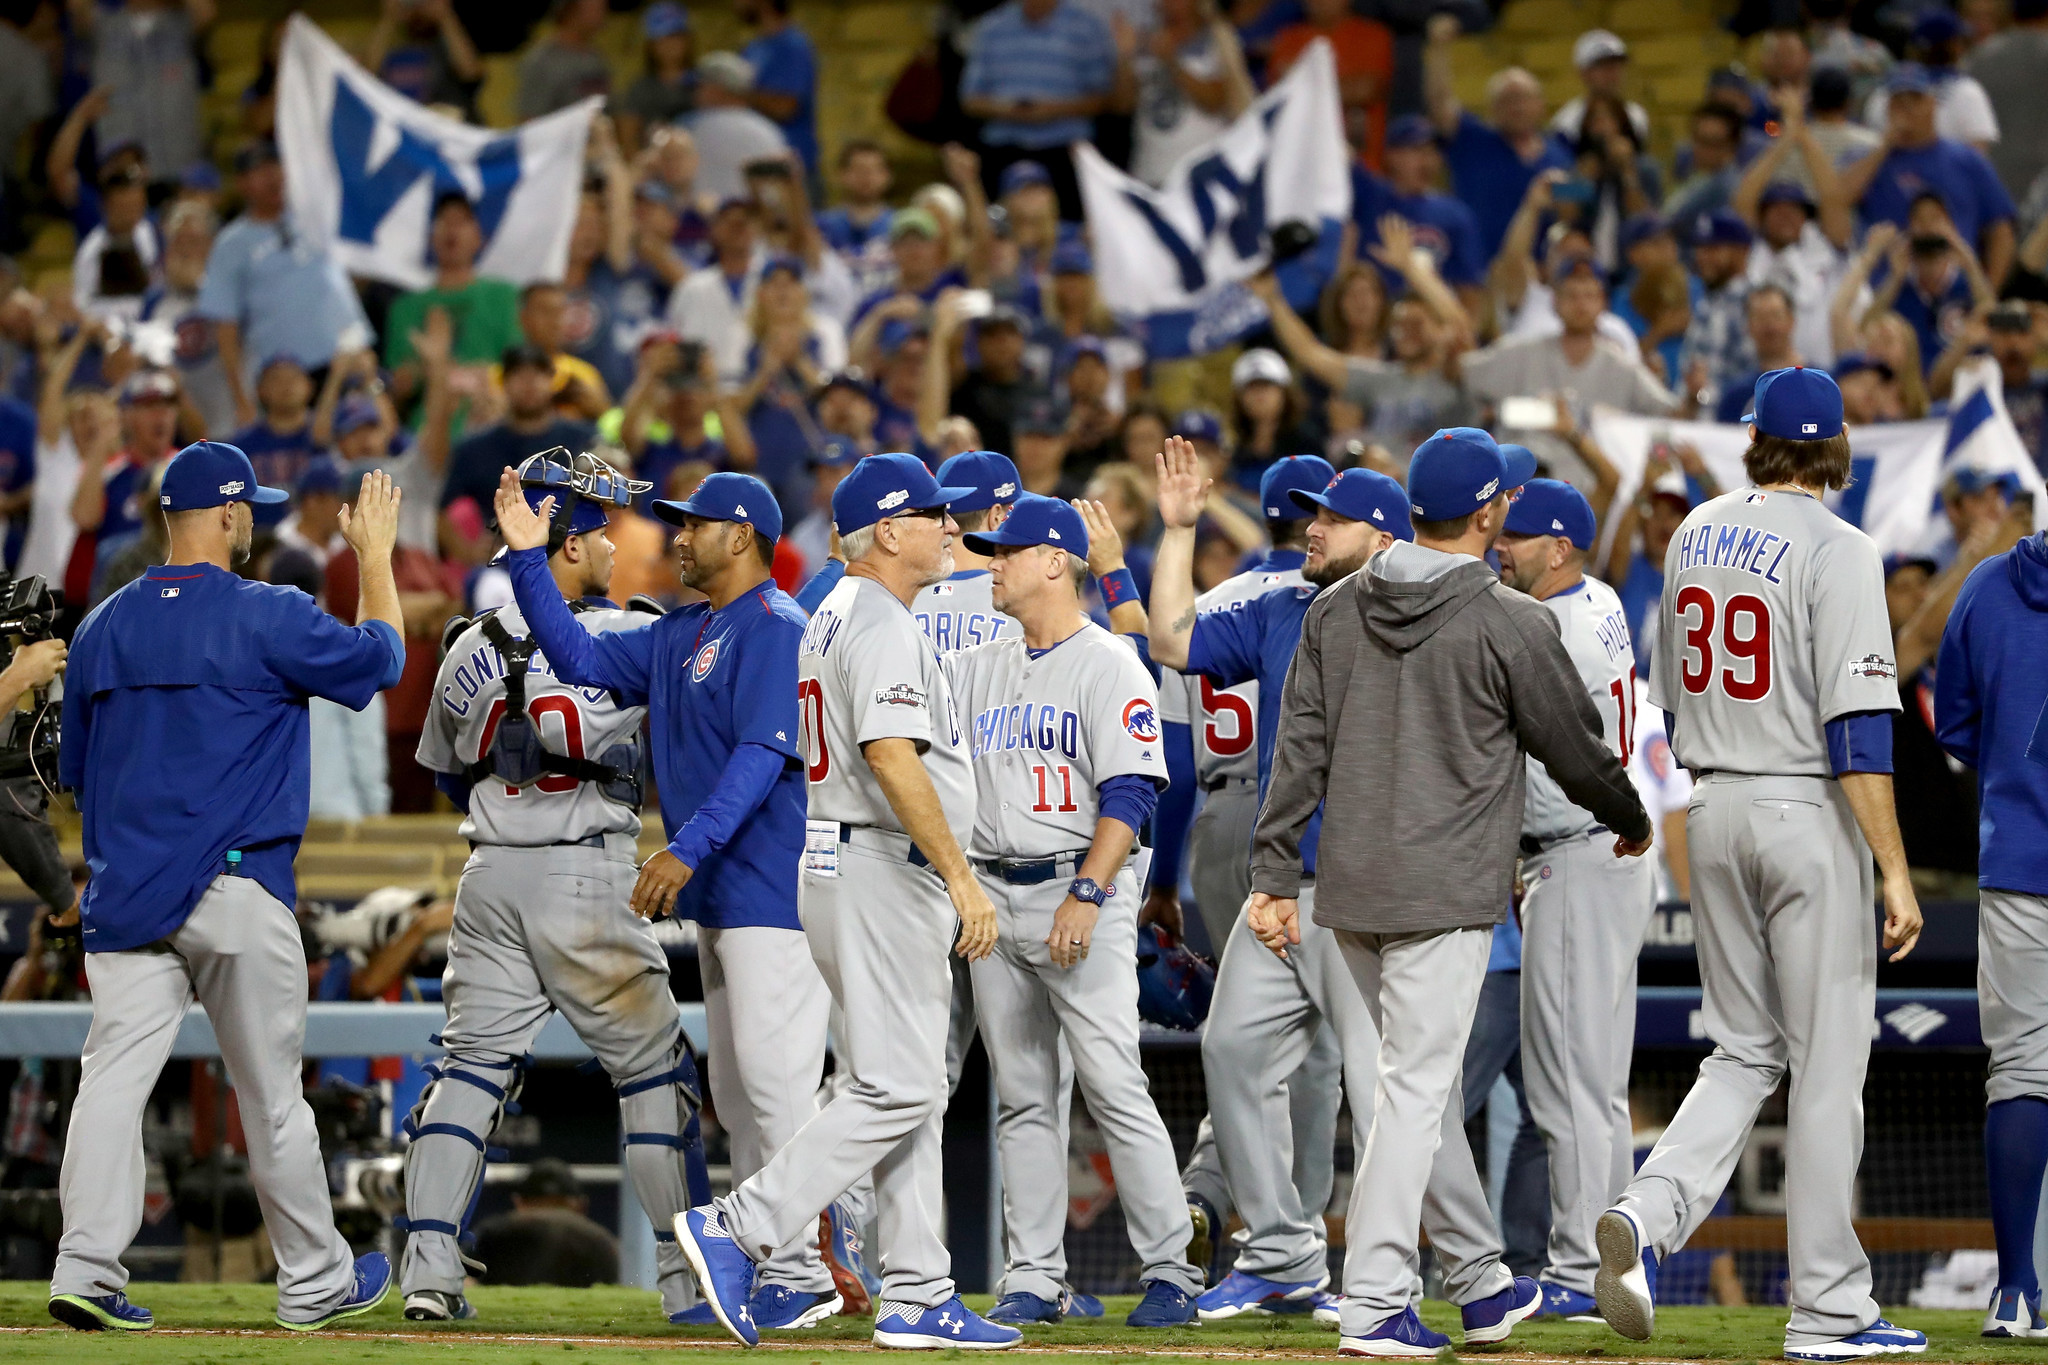 NLCS drama shifts back to Wrigley with Cubs on verge of World Series